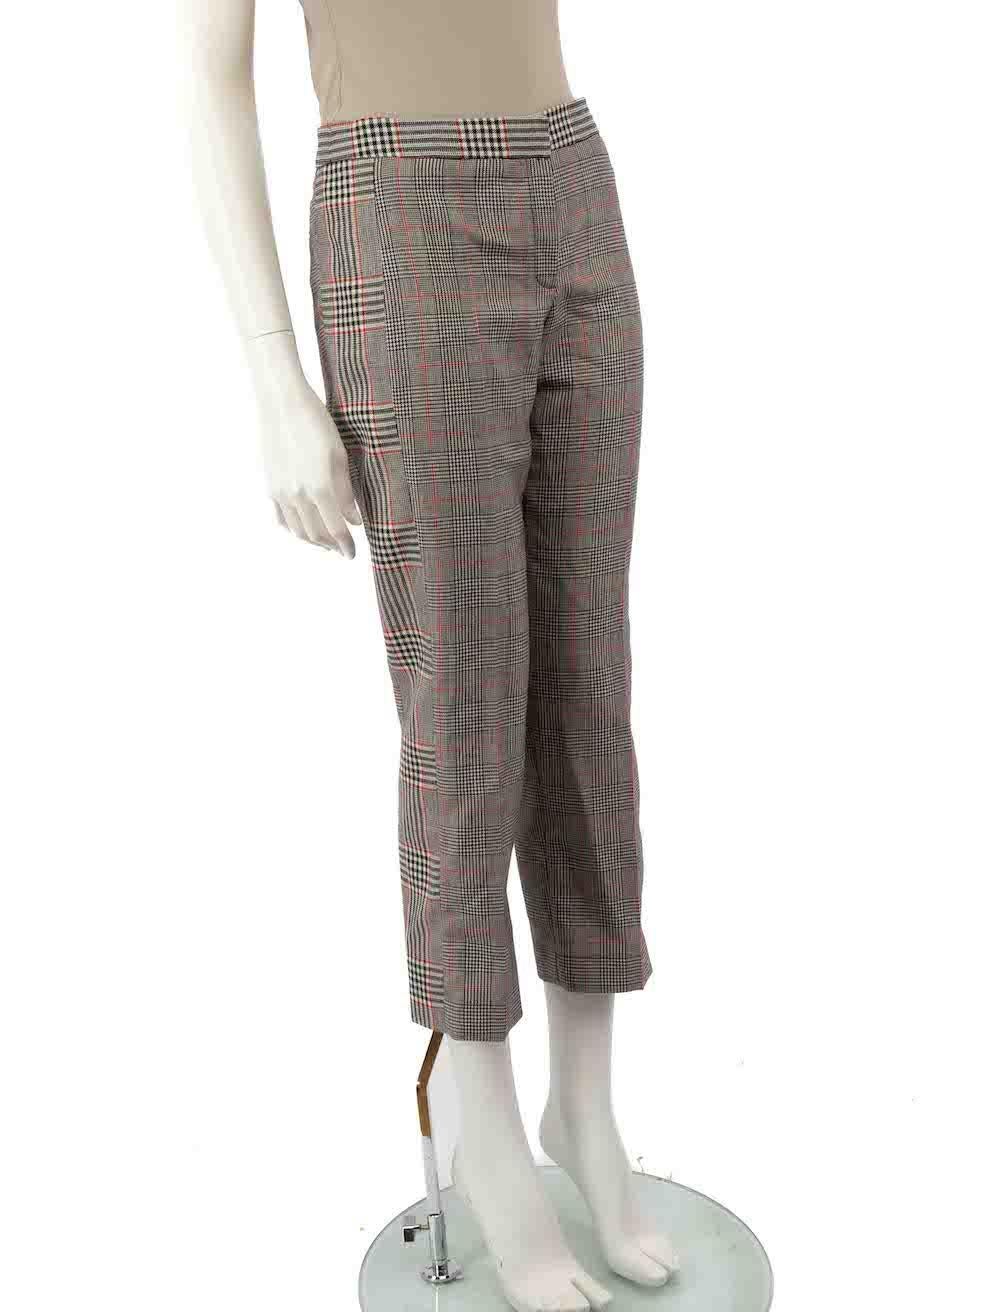 CONDITION is Very good. Minimal wear to trousers is evident. Minimal discolouration to lining of waistband. A tiny cut to the brand label on this used Alexander McQueen designer resale item.
 
 
 
 Details
 
 
 Grey
 
 Wool
 
 Trousers
 
 Plaid